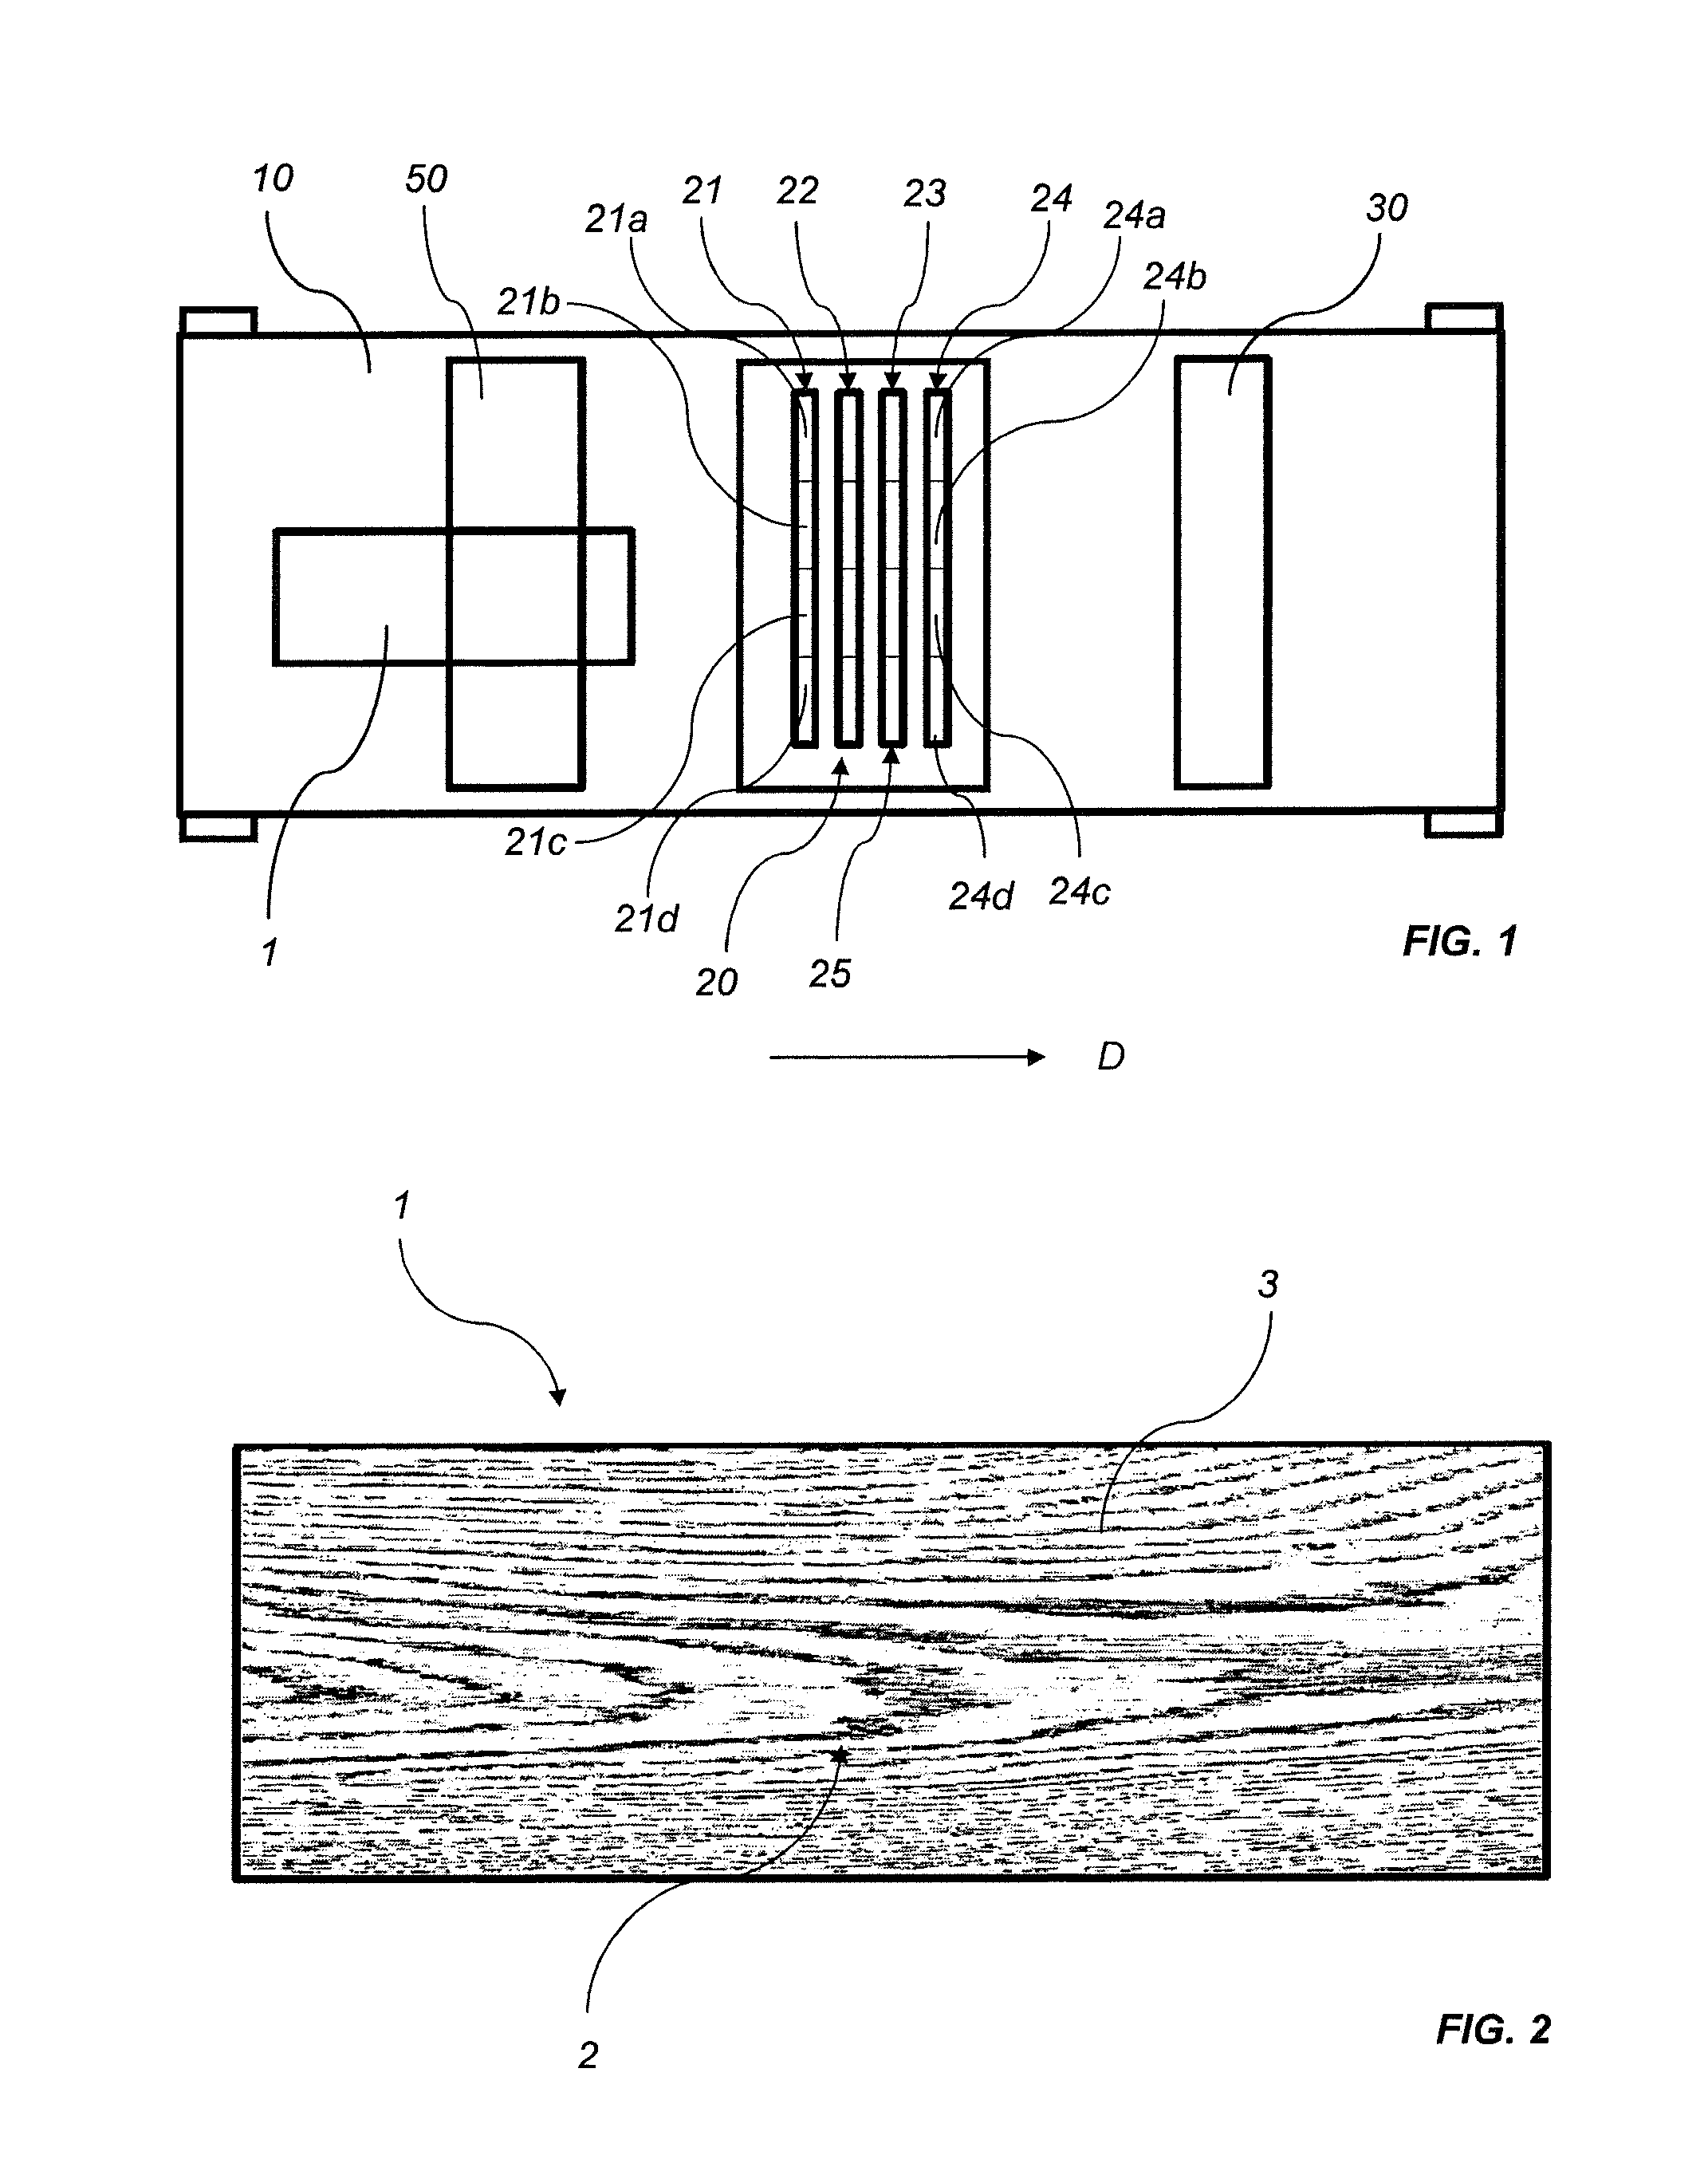 Method for forming a decorative design on an element of a wood-based material